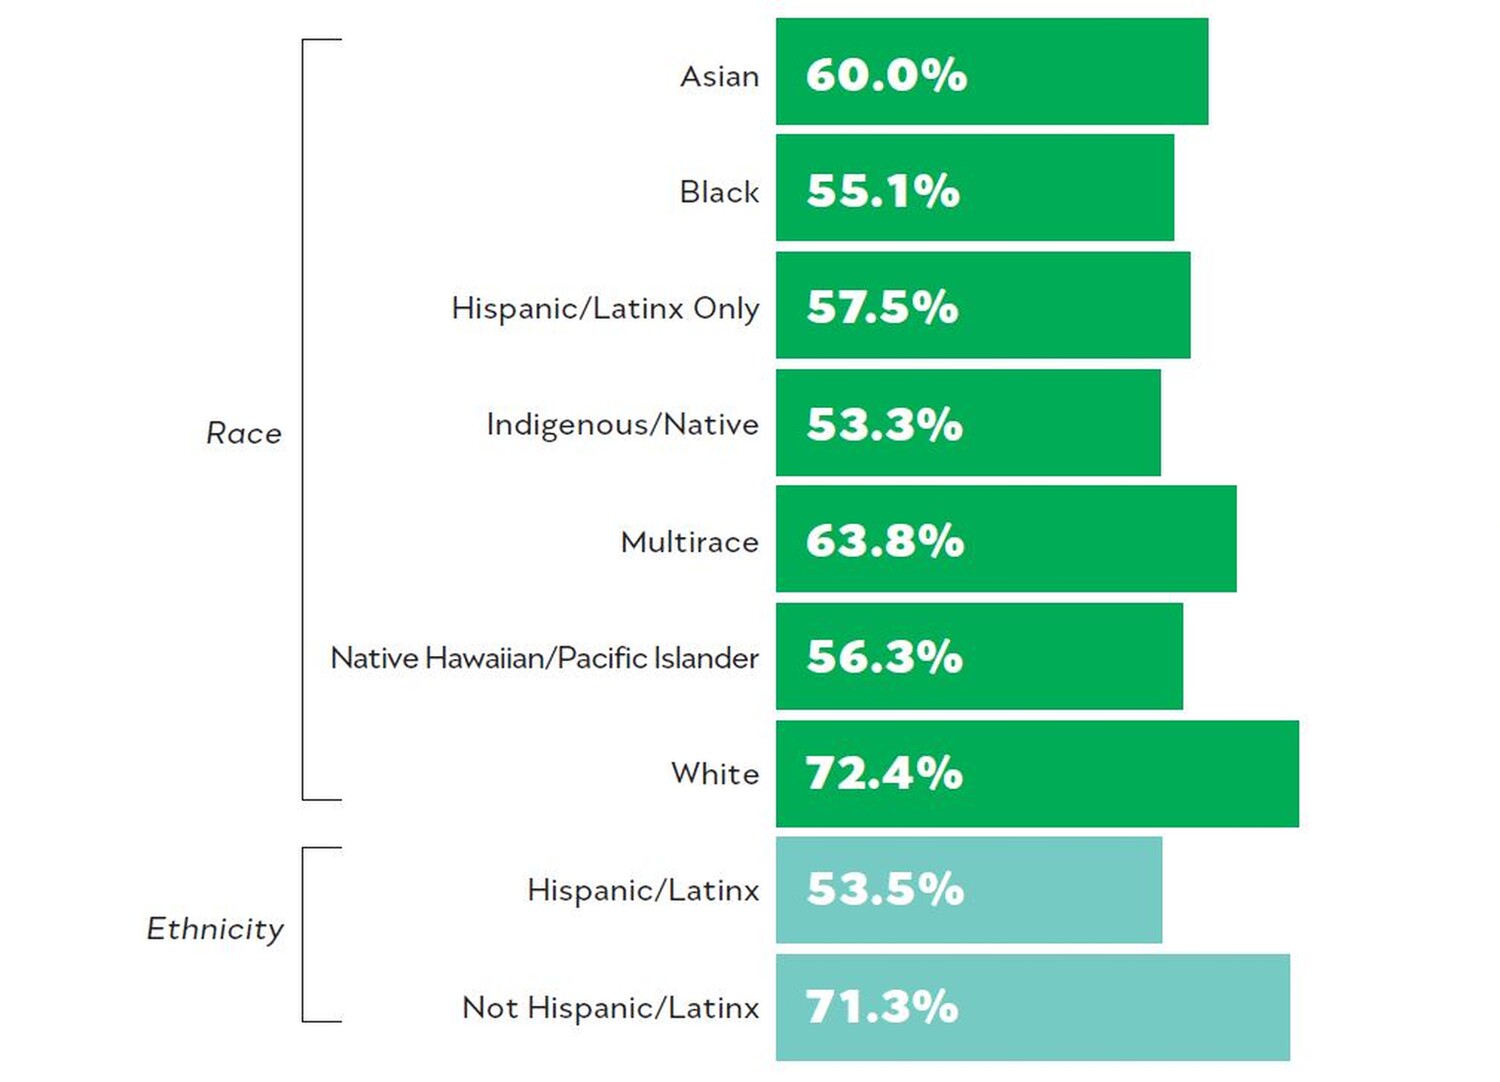 Bar chart depicting differing rates of colon cancer screenings by race (with whites being screened 10 percentage points or more higher than any other race) and ethnicity (Hispanic/Latinx 53.5% vs. non-Hispanic/Latinx 71.3%)